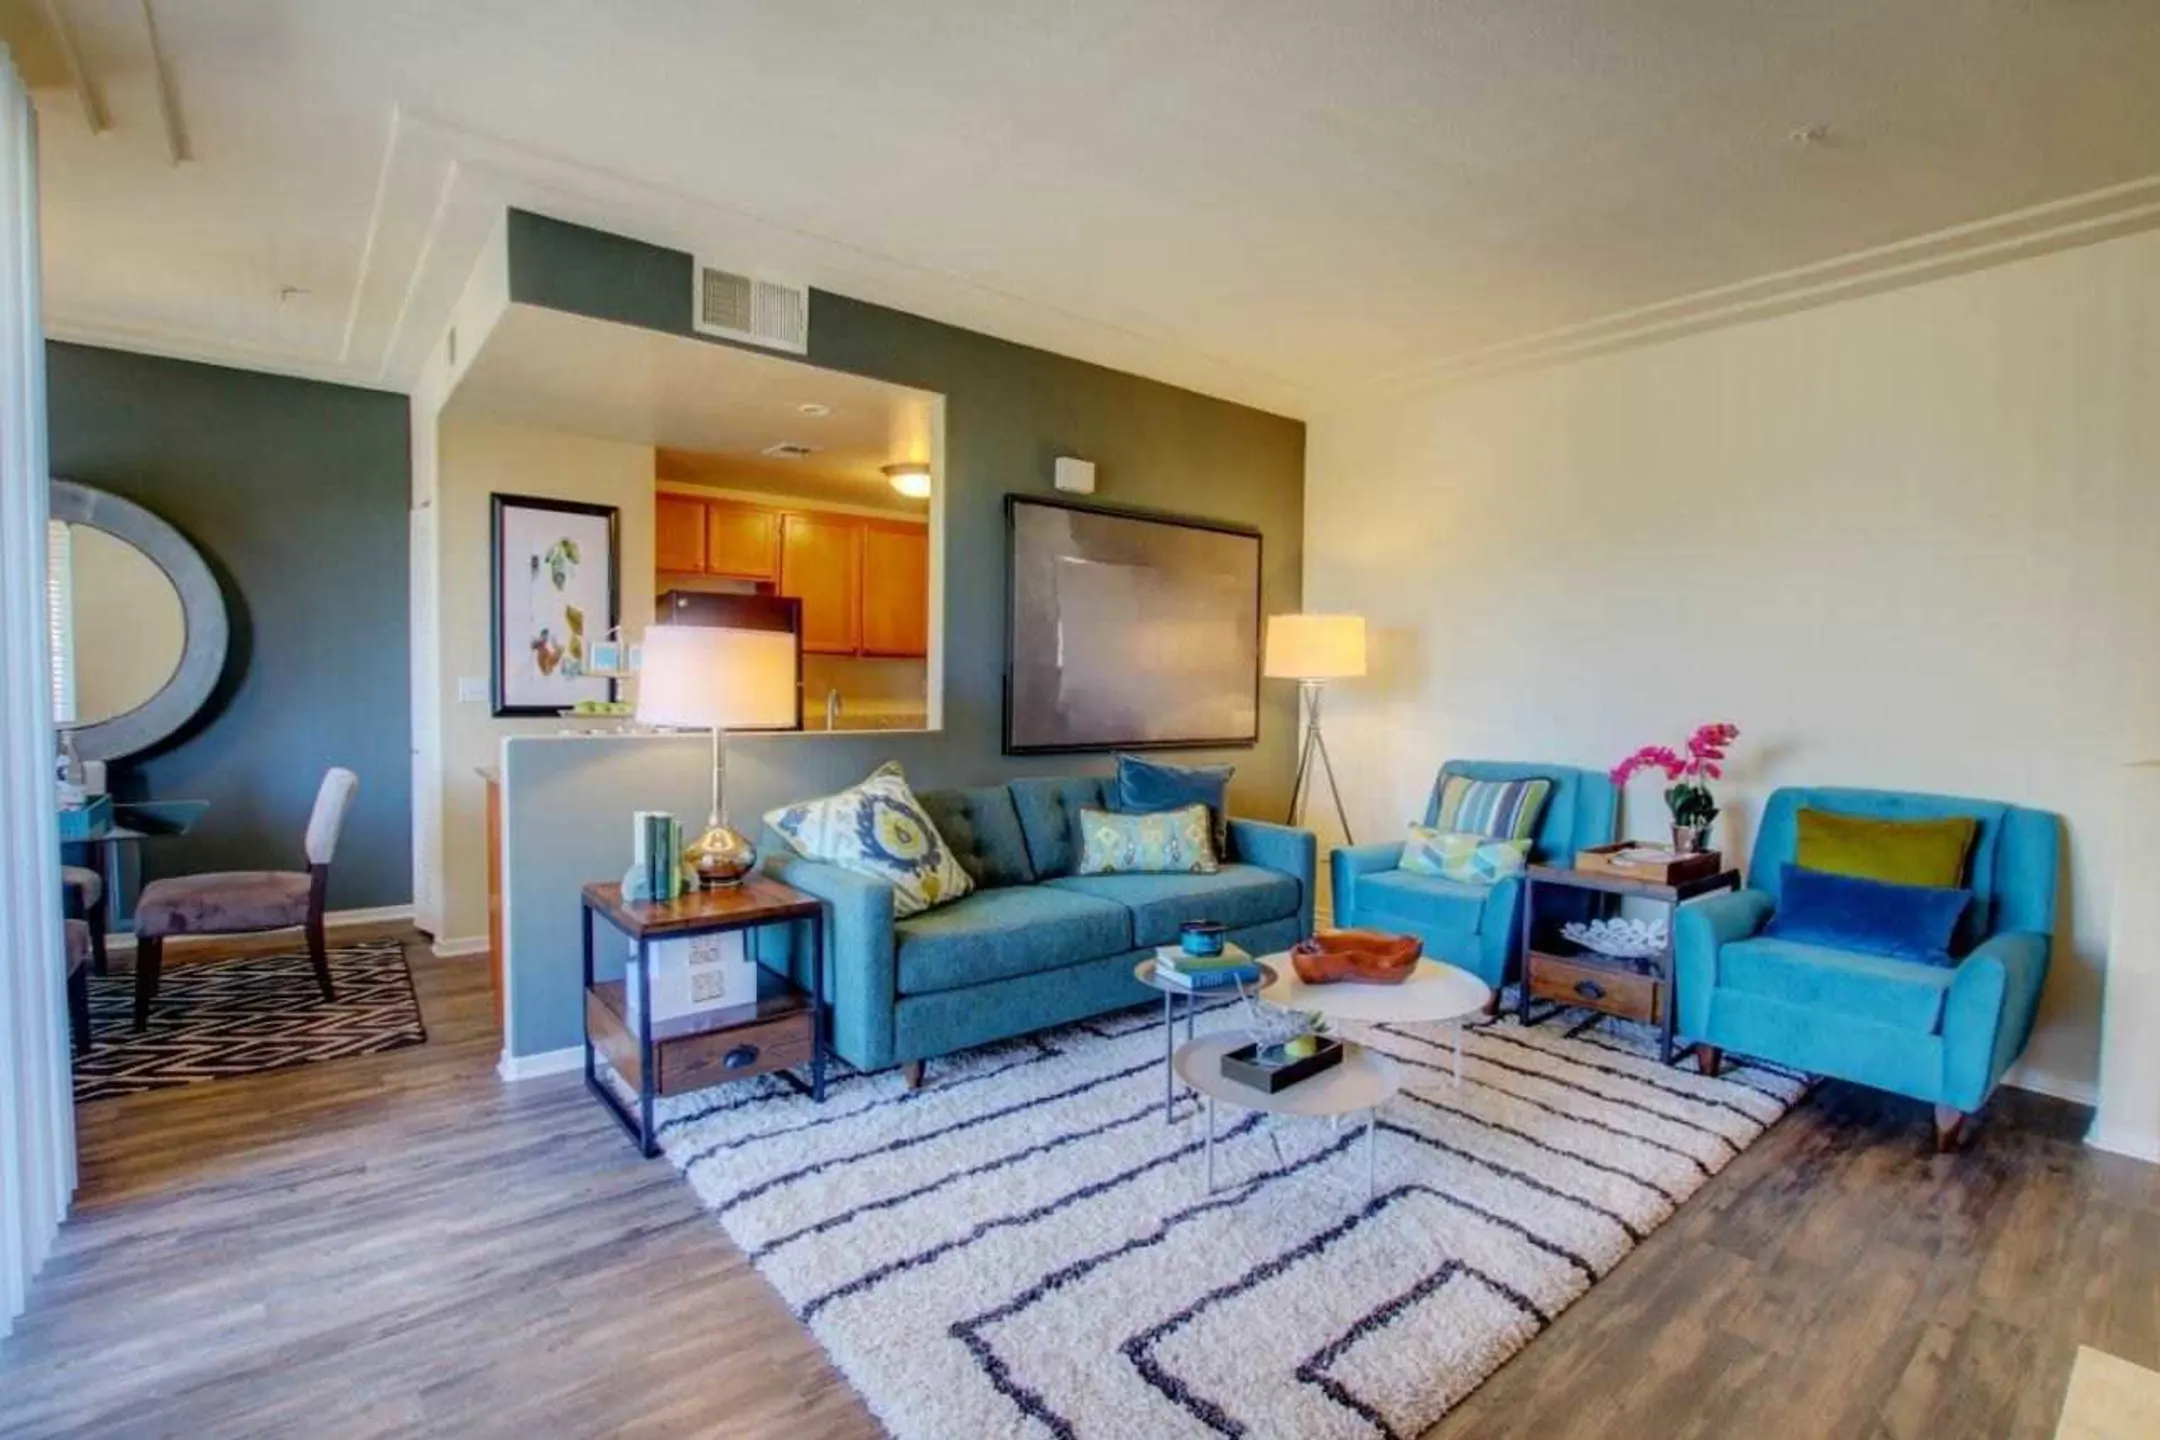 Living Room - Prominence Apartments - San Marcos, CA